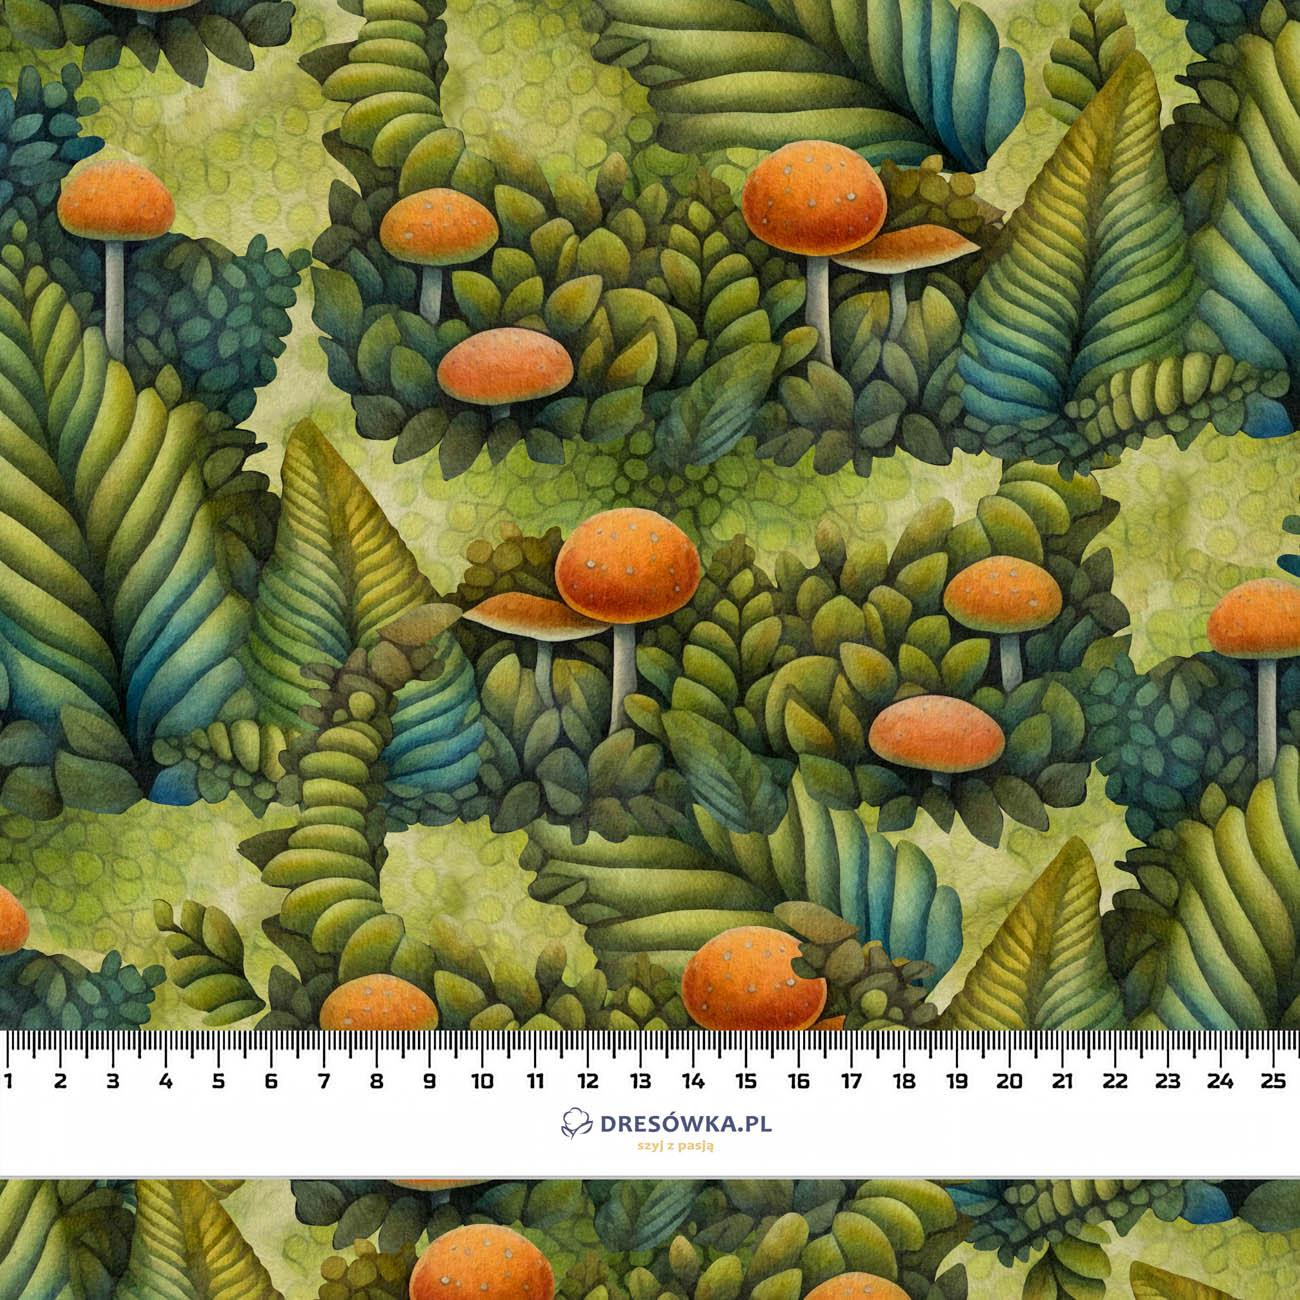 BOHO FOREST PAT. 1 - Cotton woven fabric